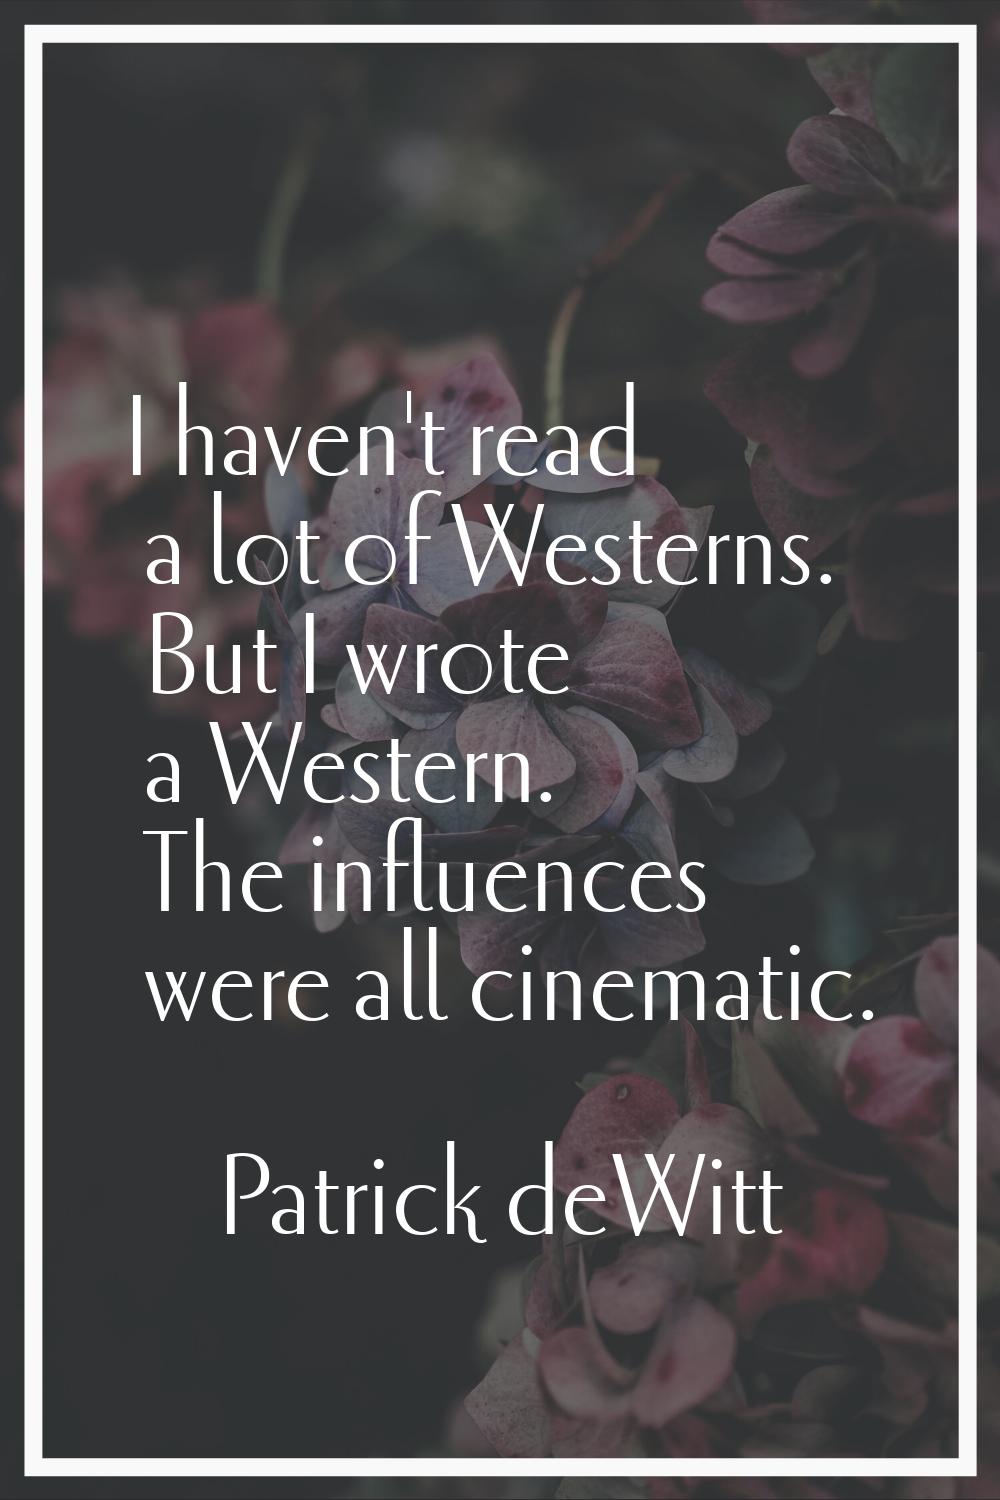 I haven't read a lot of Westerns. But I wrote a Western. The influences were all cinematic.